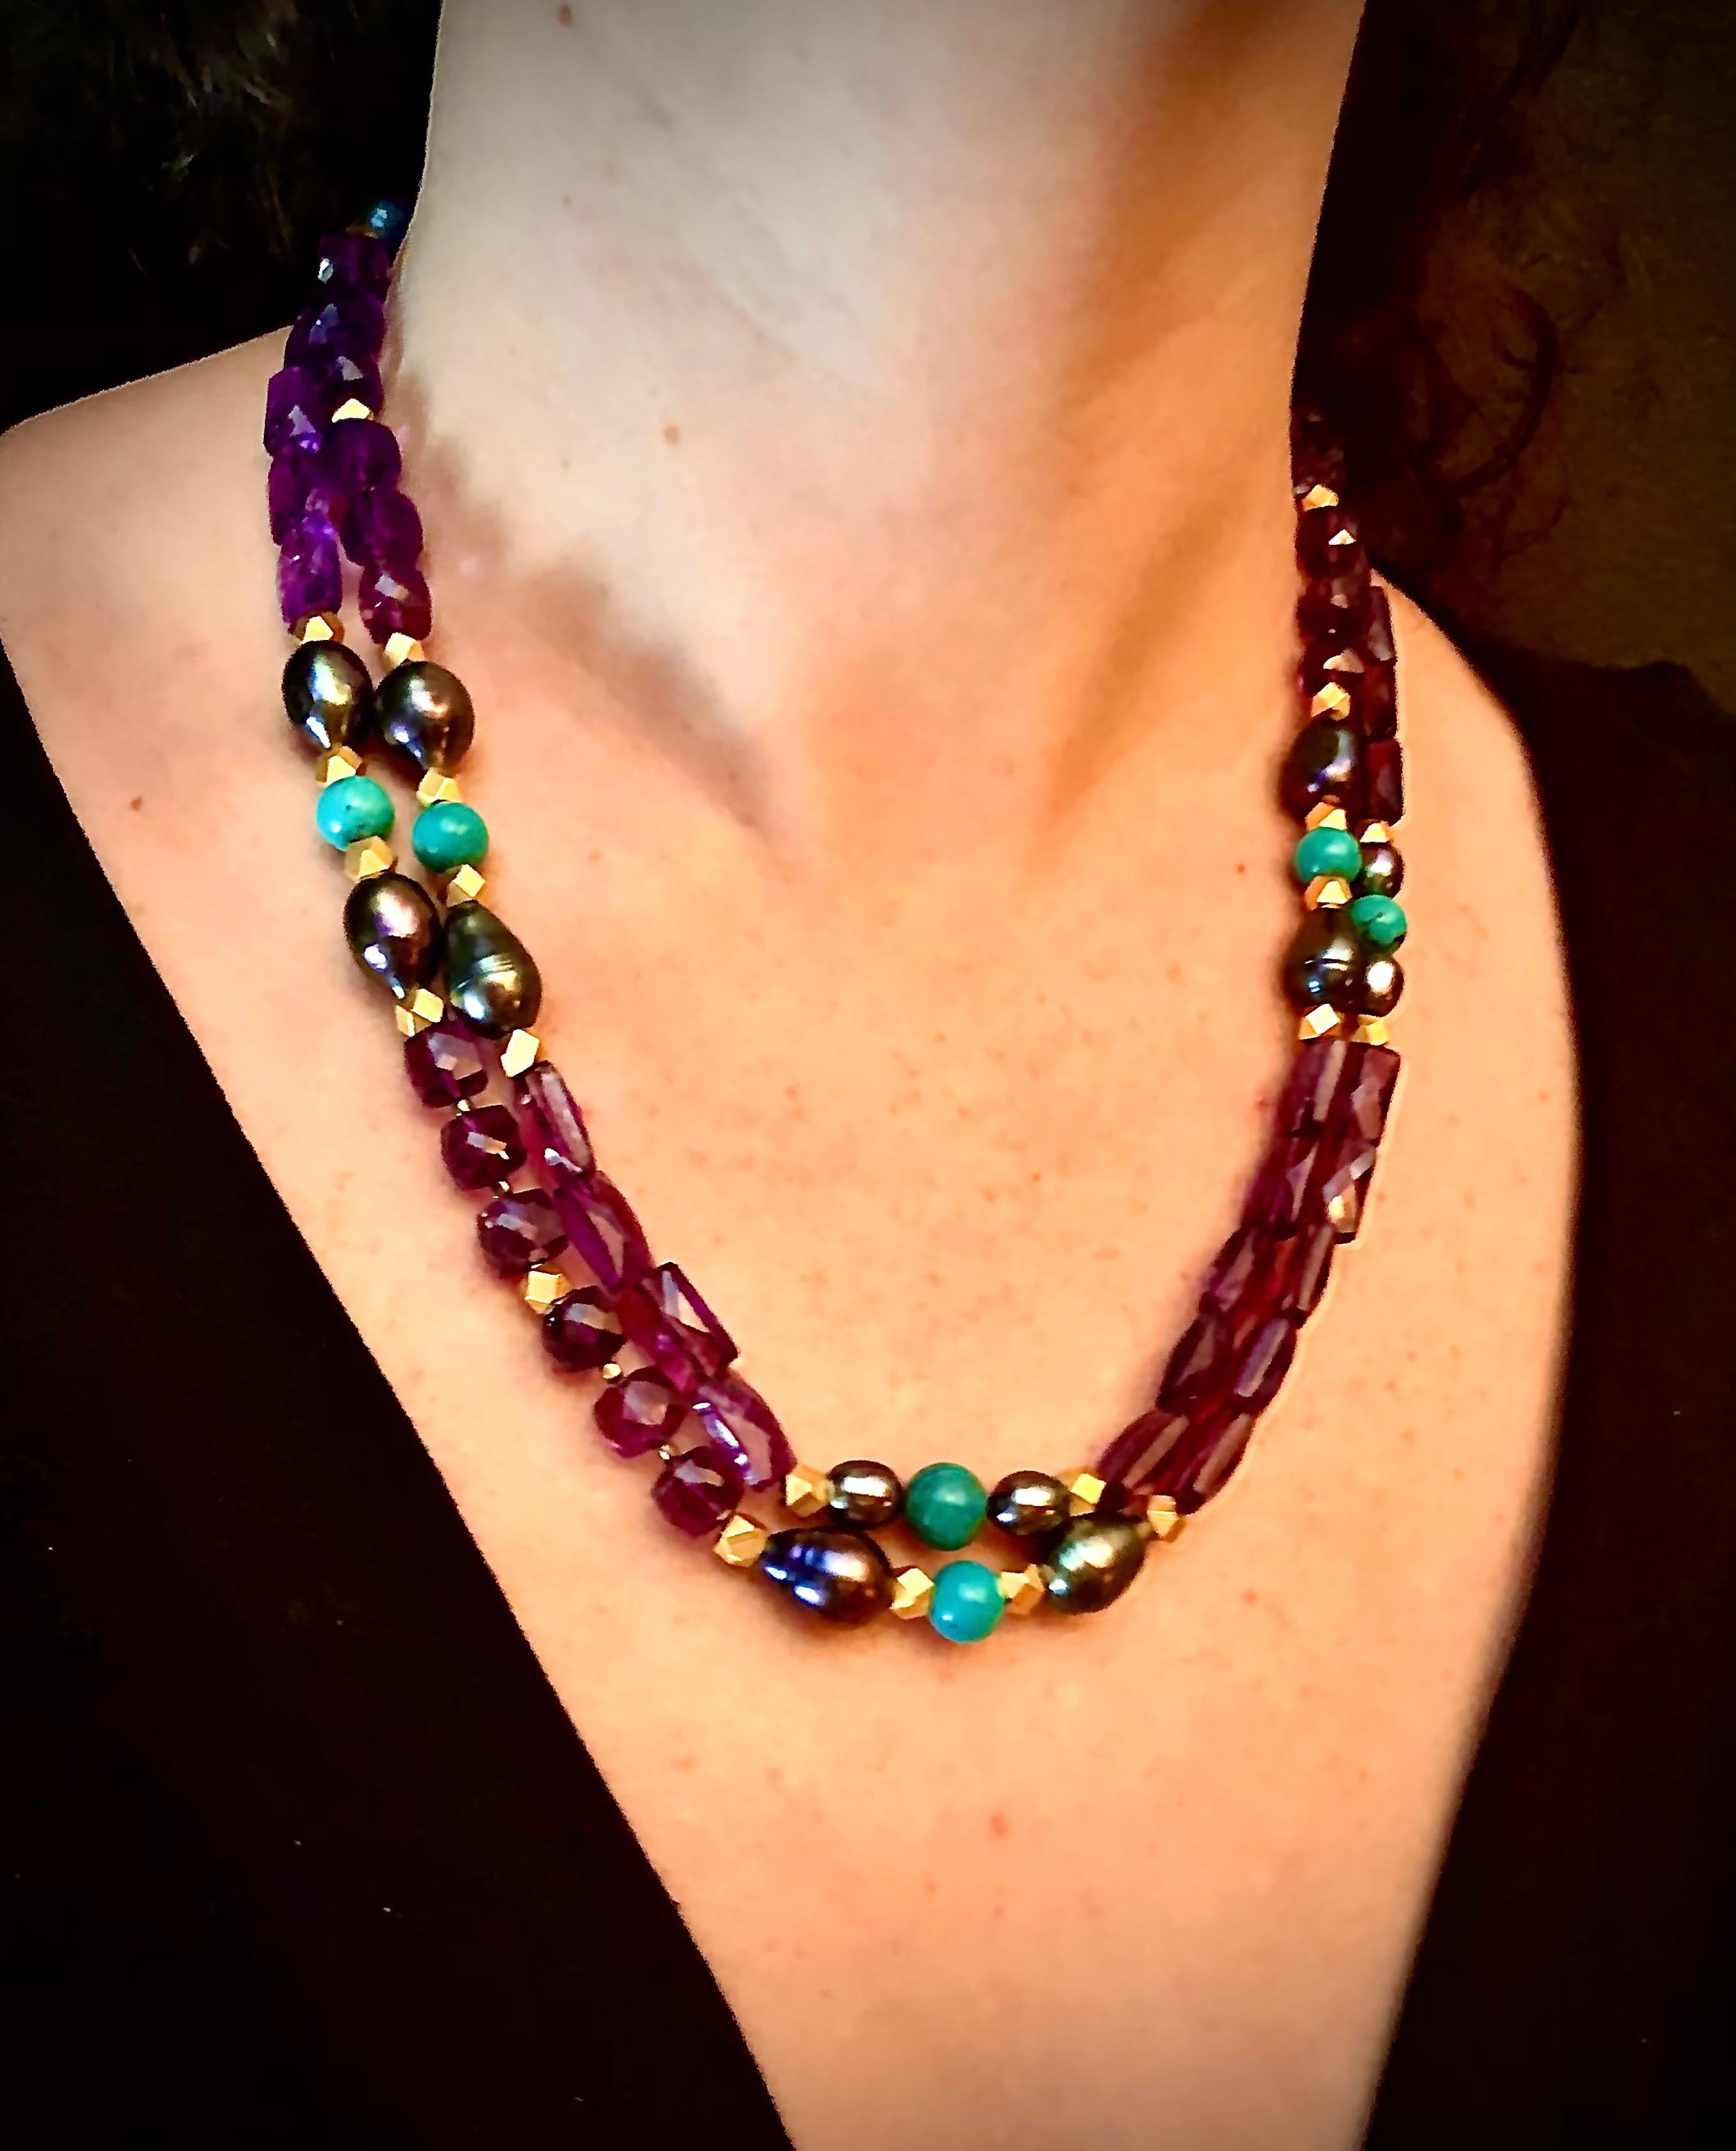 Long very smart single strand sautoir of multi cut faceted beautiful rich colored amethysts accented with brilliantly colored turquoise beads flanked with pear shaped black cultured freshwater pearls. The whole necklace has matte gold finish metal